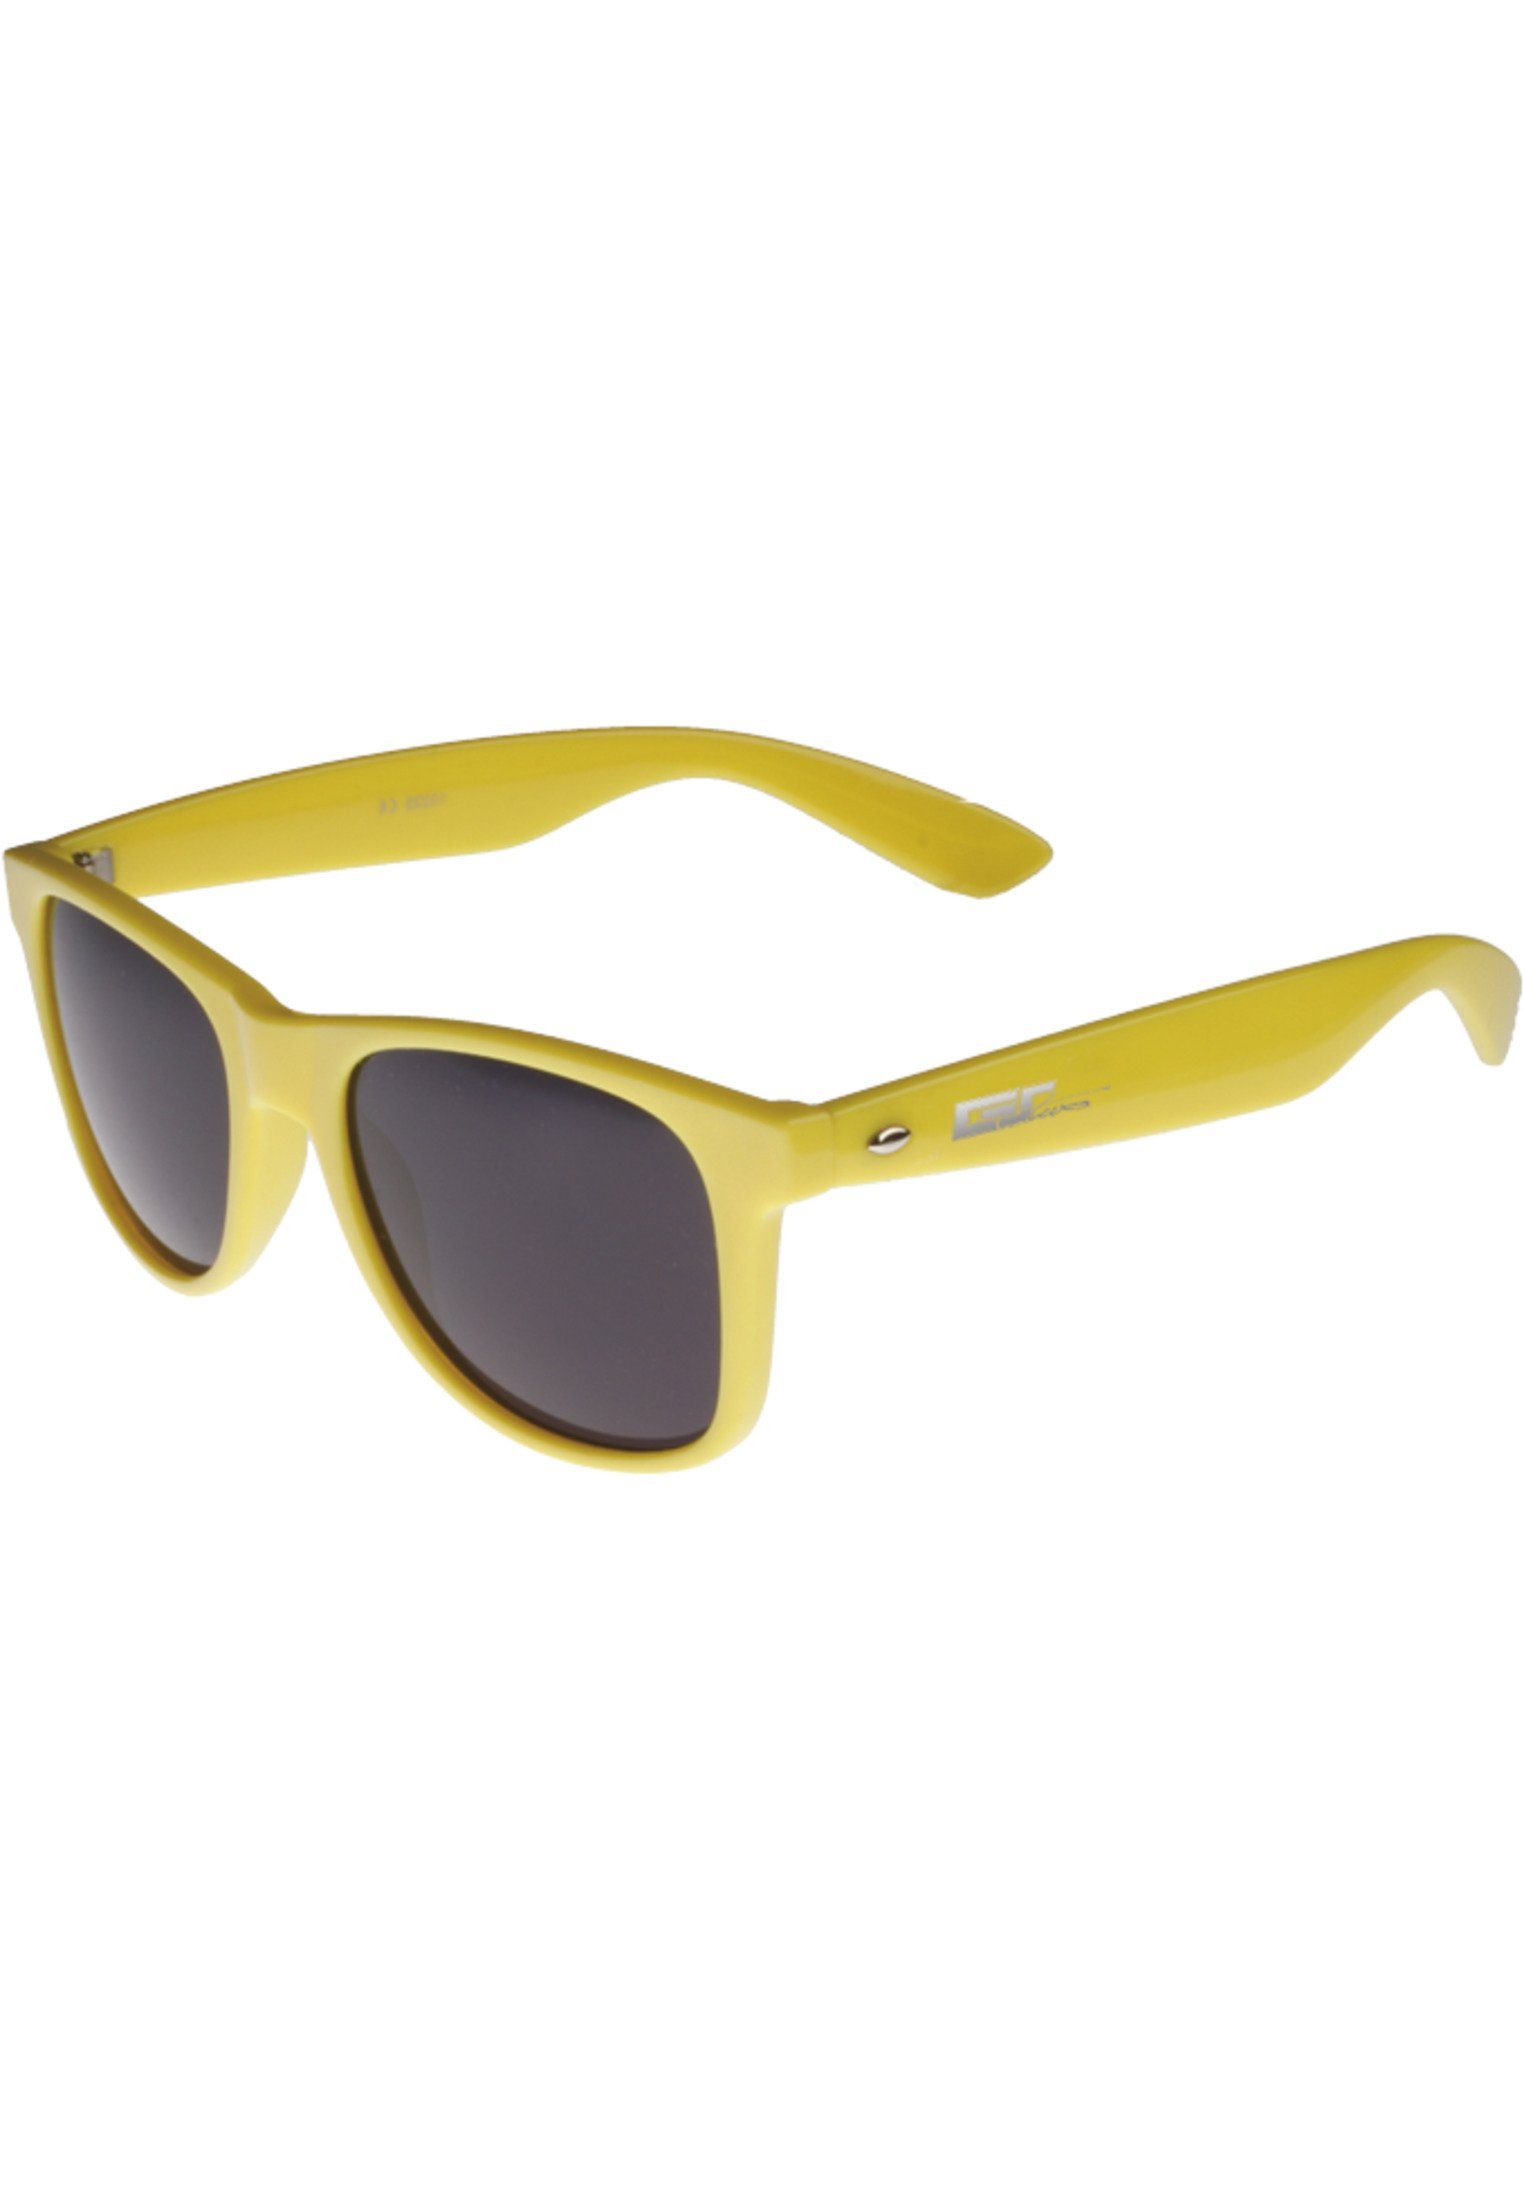 Sonnenbrille Groove GStwo MSTRDS Shades yellow Accessoires